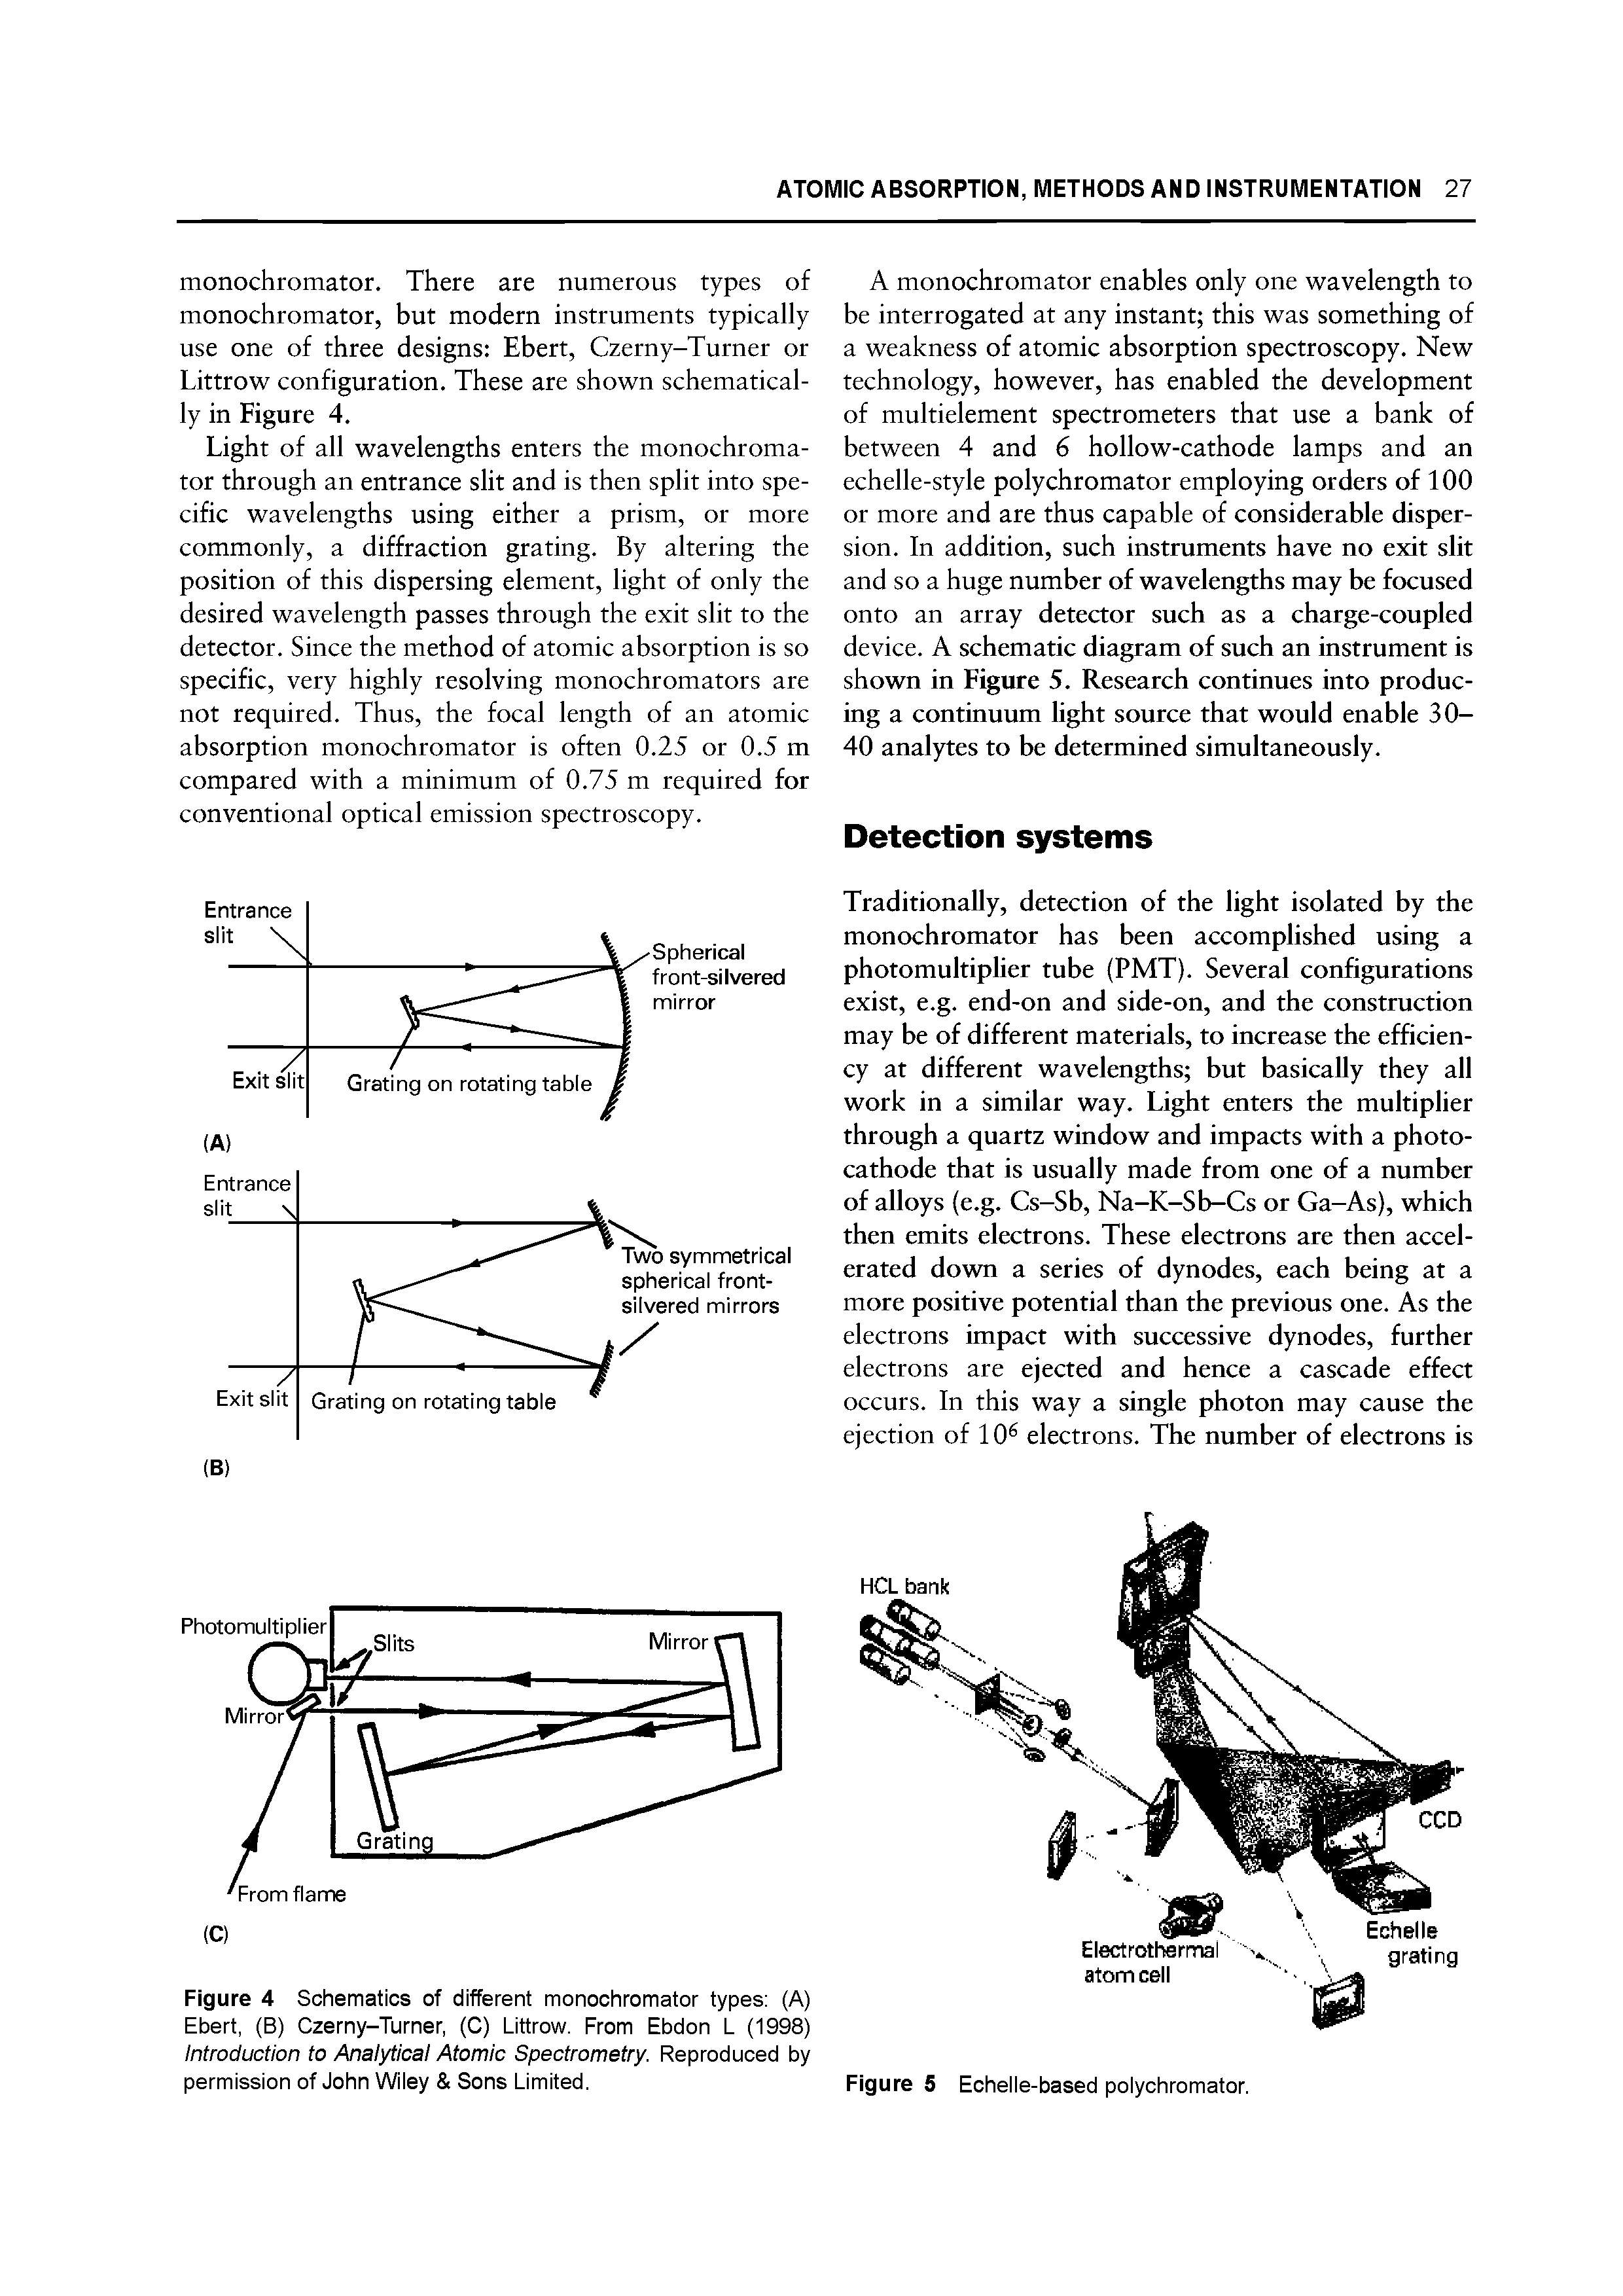 Figure 4 Schematics of different monochromator types (A) Ebert, (B) Czerny-Turner, (C) Littrow. From Ebdon L (1998) Introduction to Analytical Atomic Spectrometry. Reproduced by permission of John Wiiey Sons Limited.